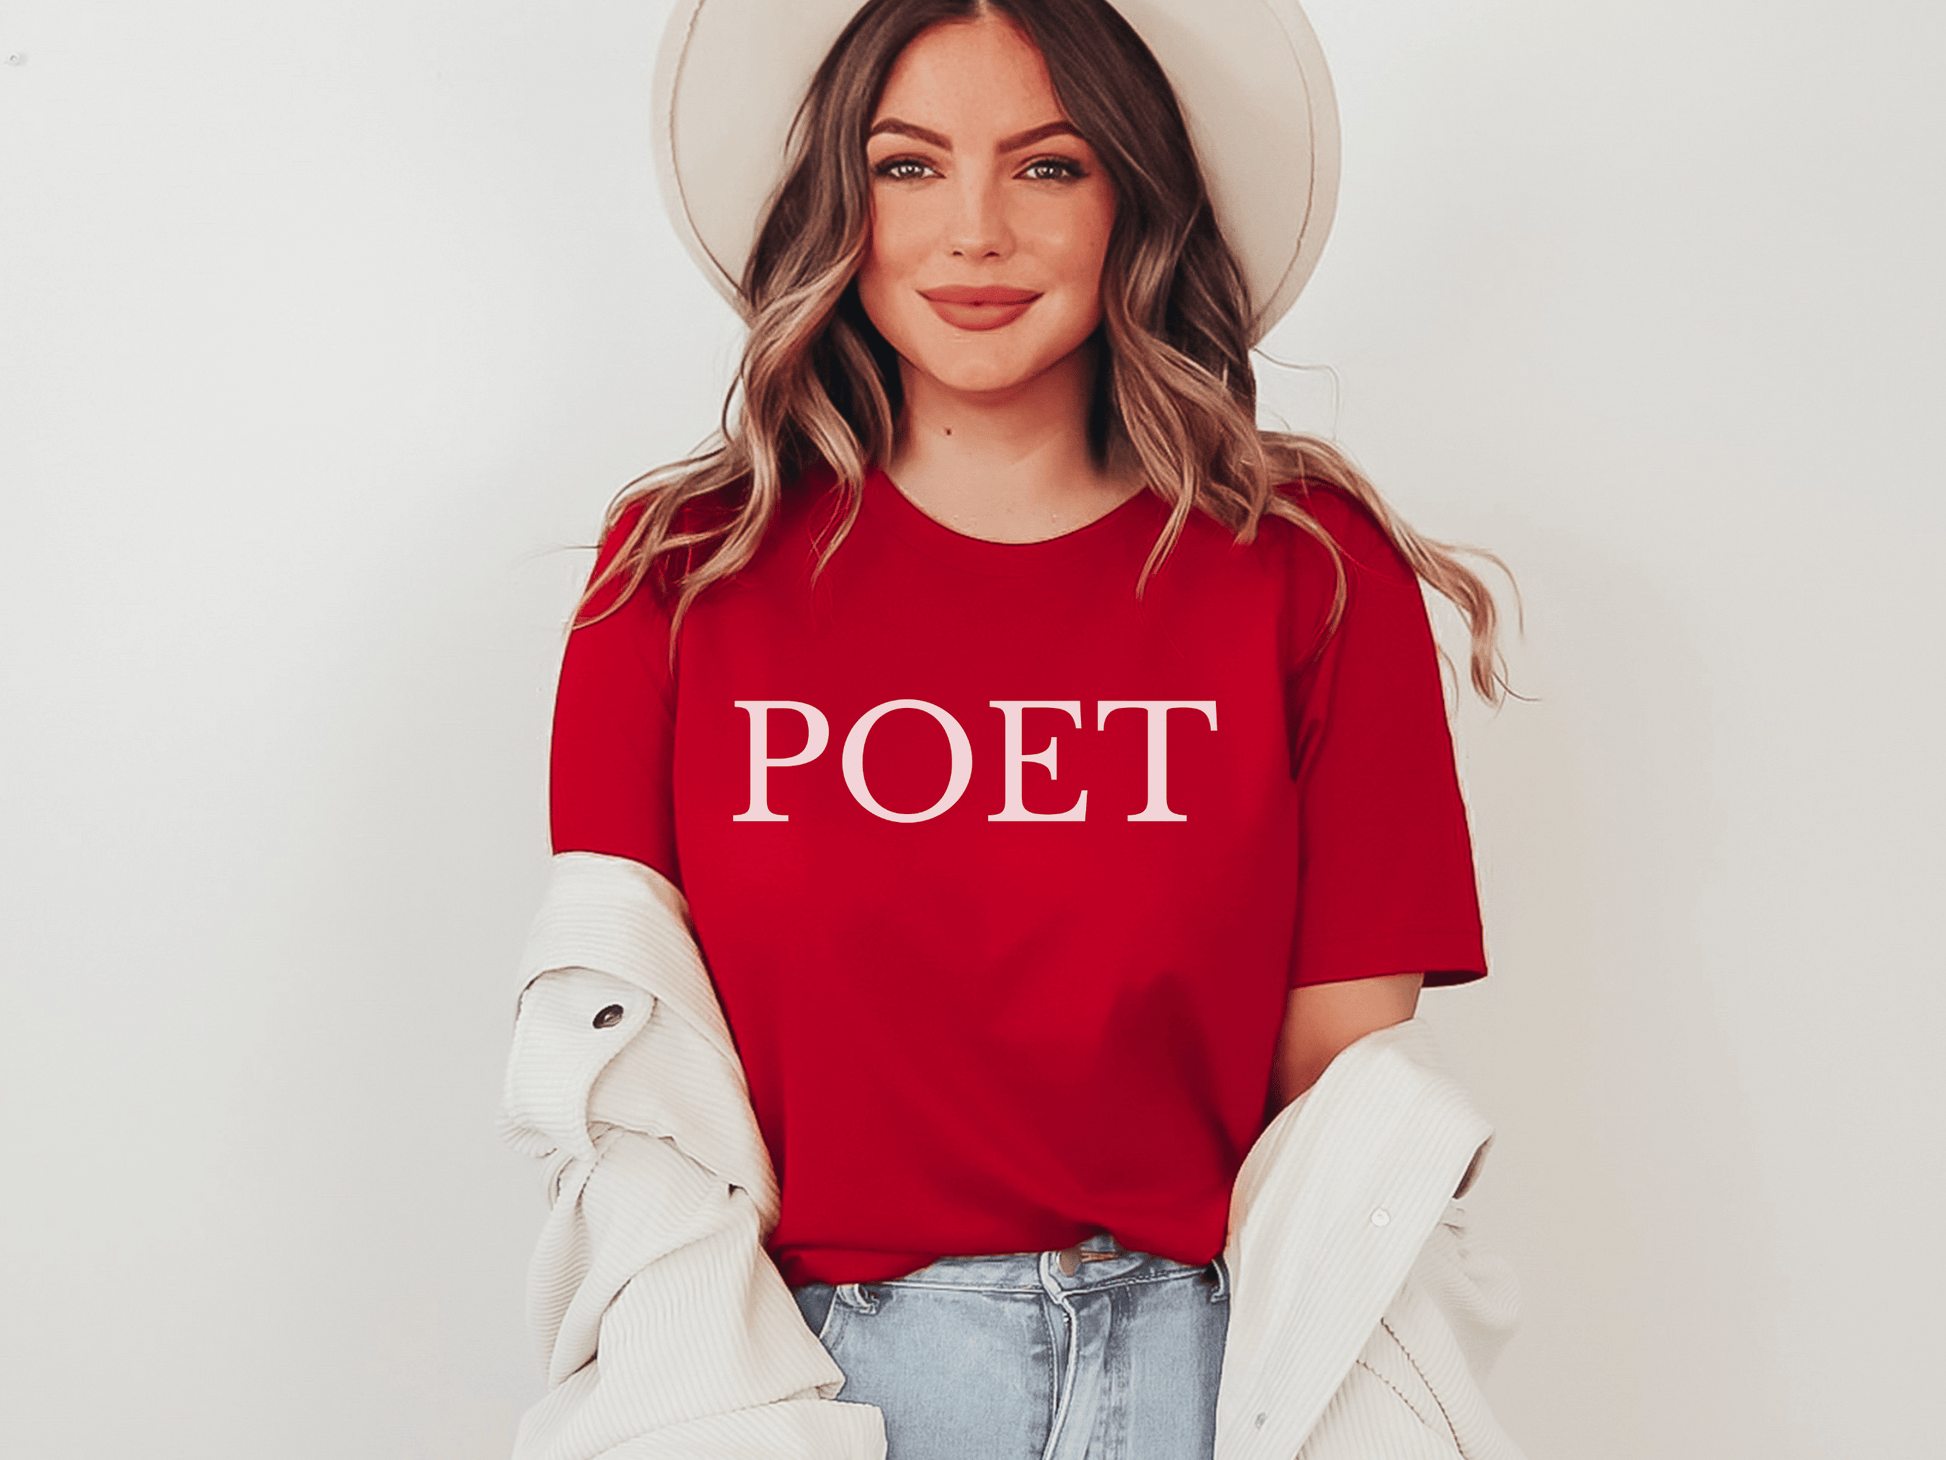 Poet T-Shirt in Red